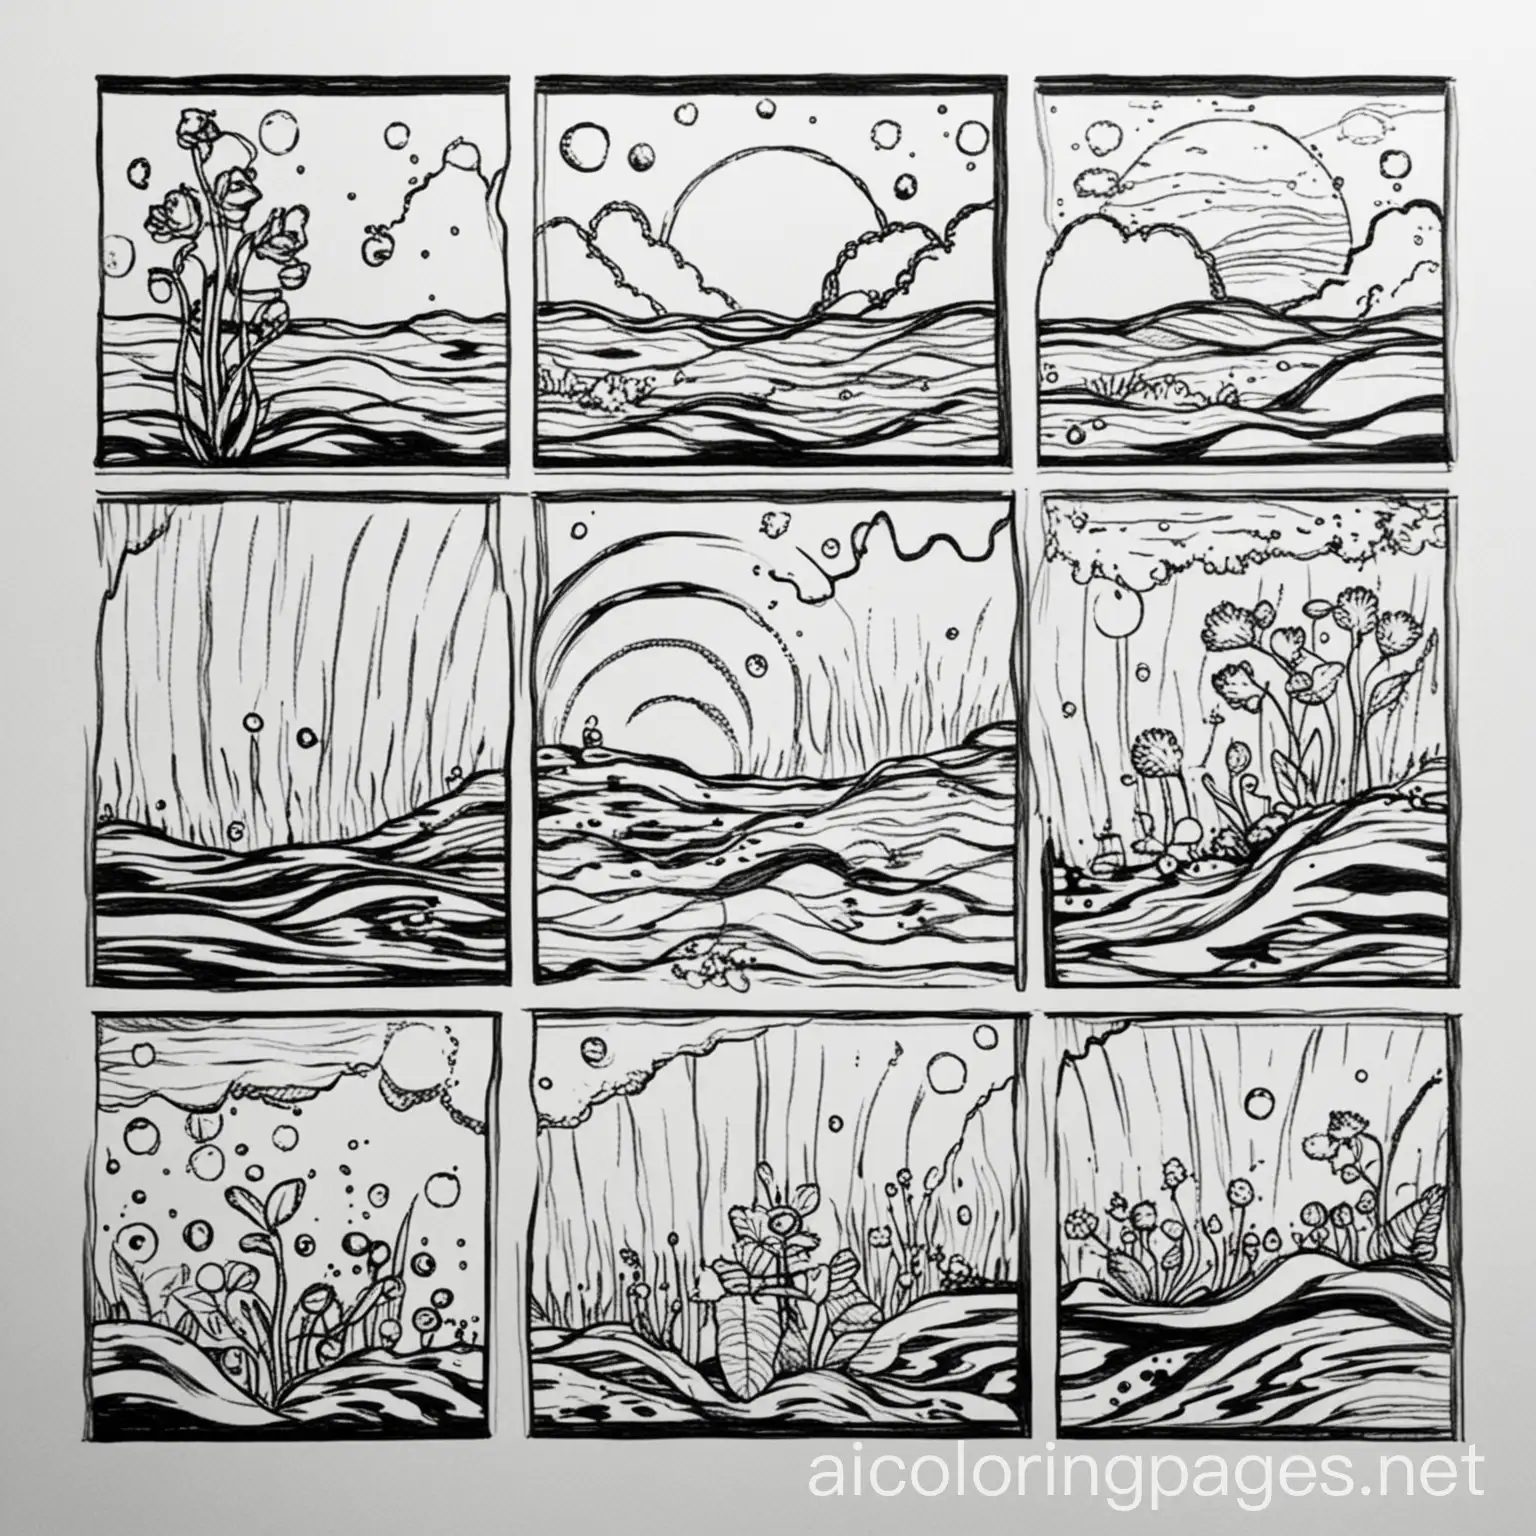 Simplicity-in-Water-Collage-Coloring-Page-Black-and-White-Line-Art-for-Kids